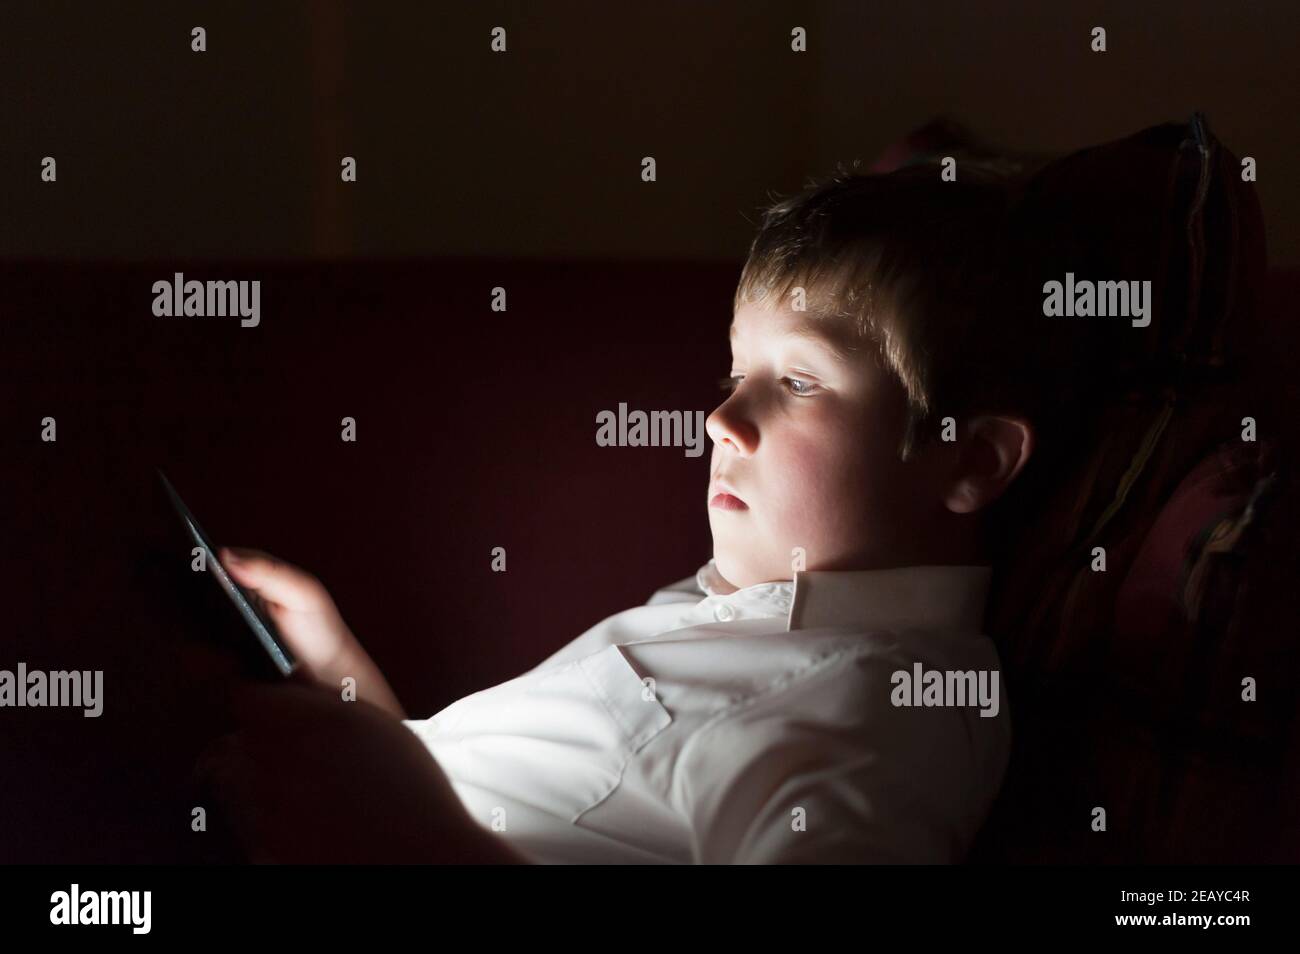 A 9 year old boy using a tablet in the evening Stock Photo